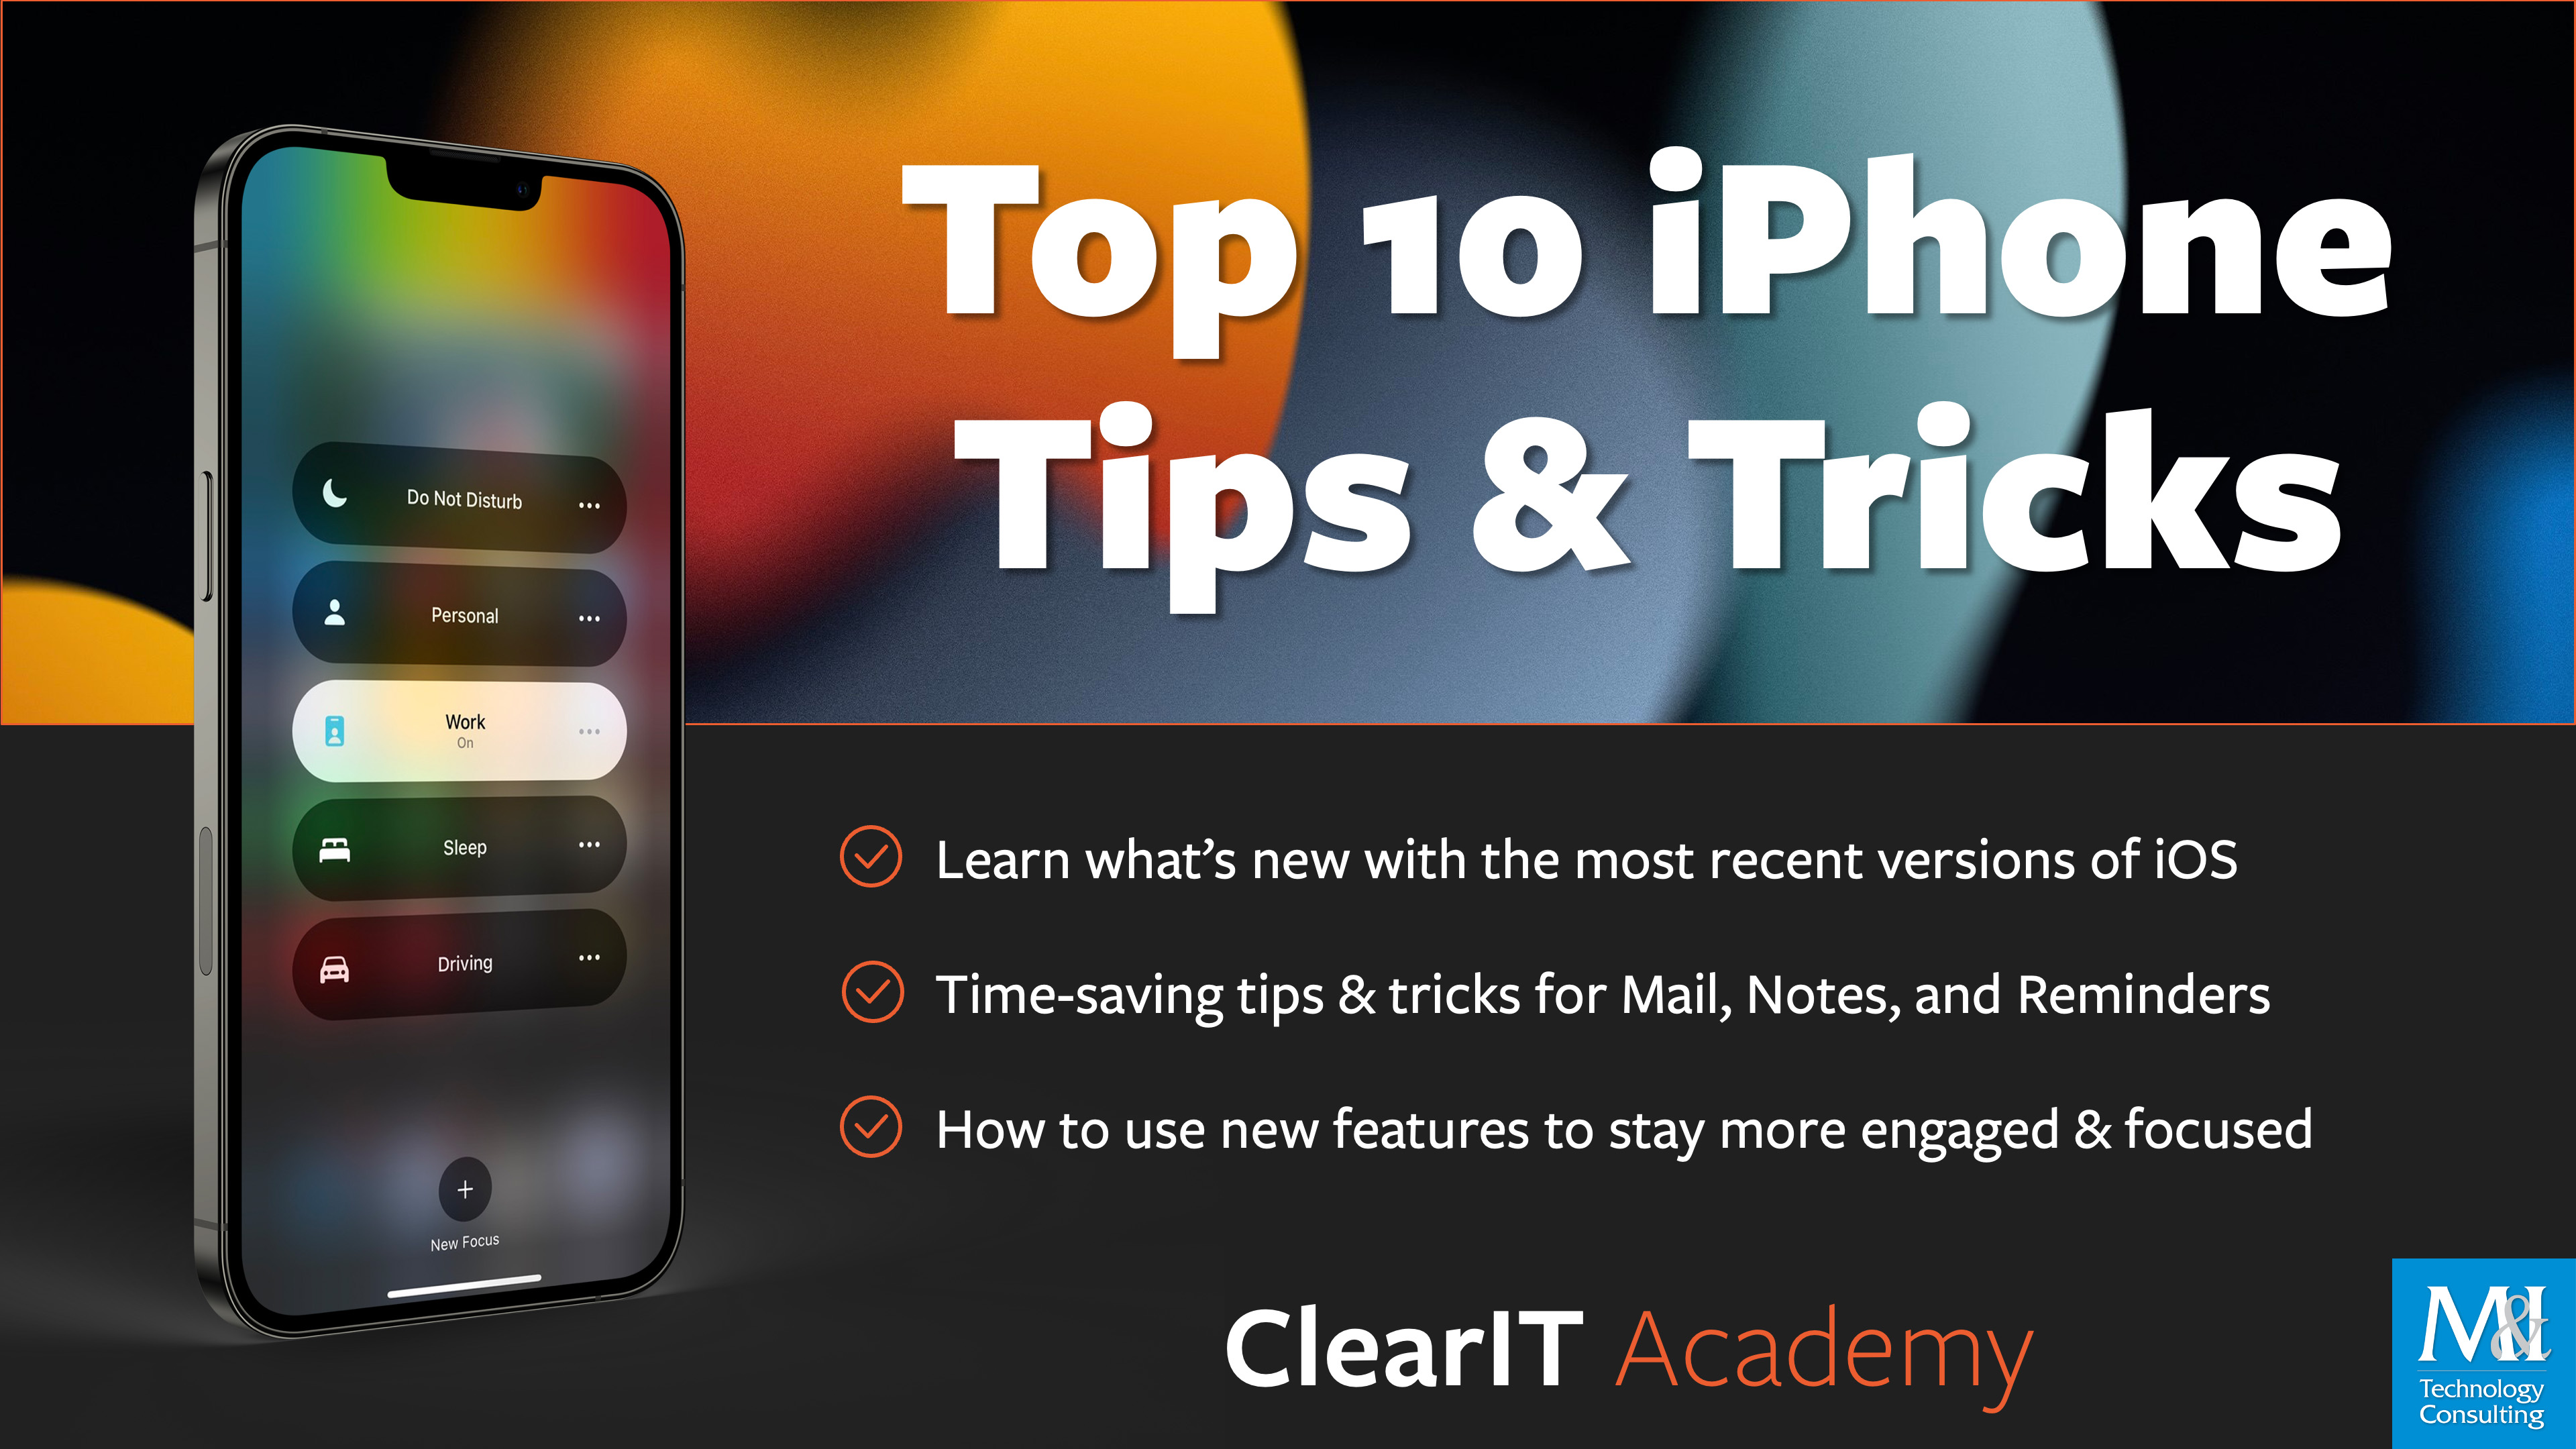 clearit-academy-top-10-iphone-tips-and-tricks